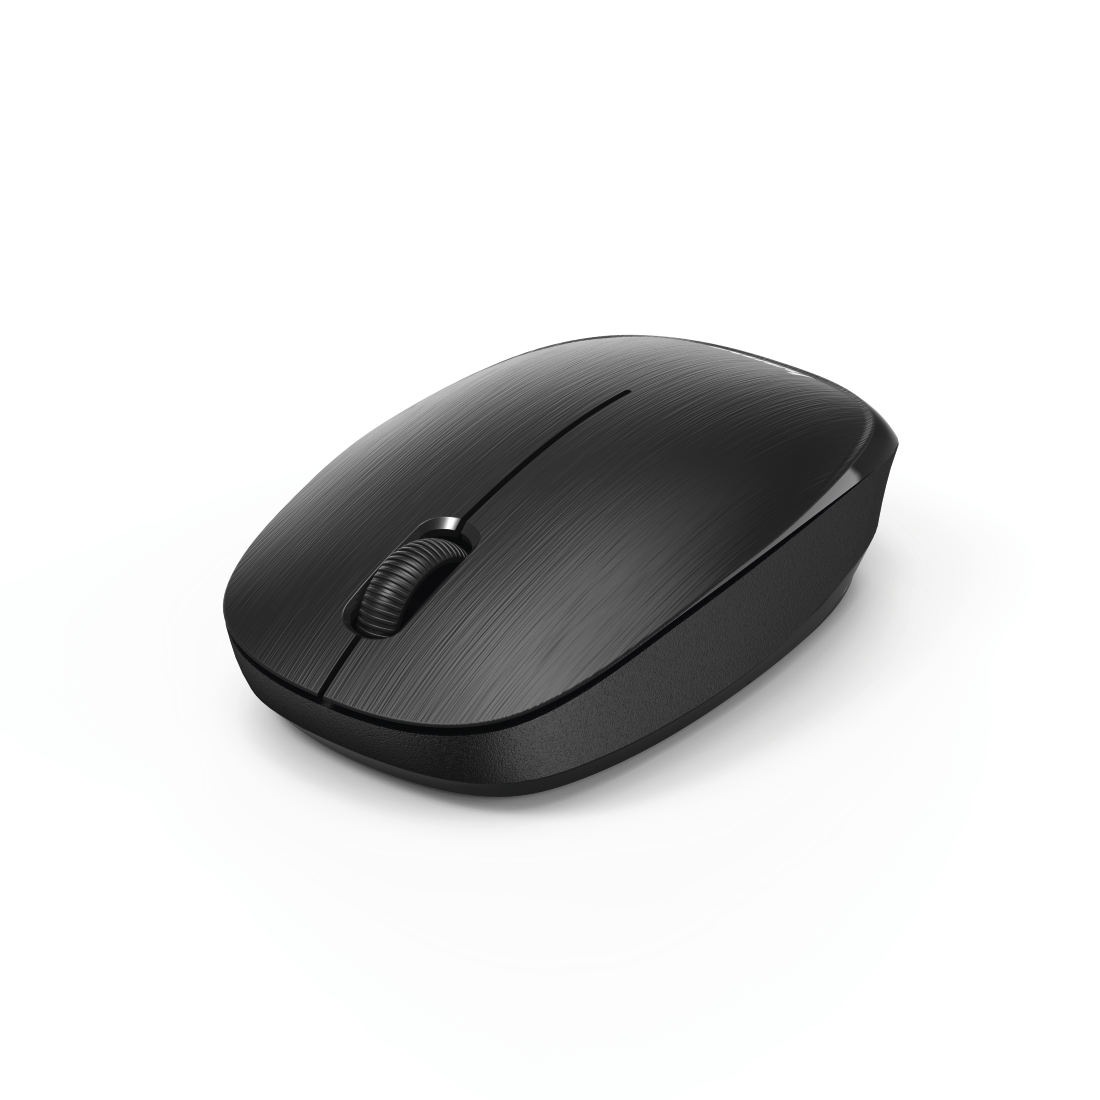 Hama MW-110 Optical Wireless Mouse - Black | 371508 from Hama - DID Electrical